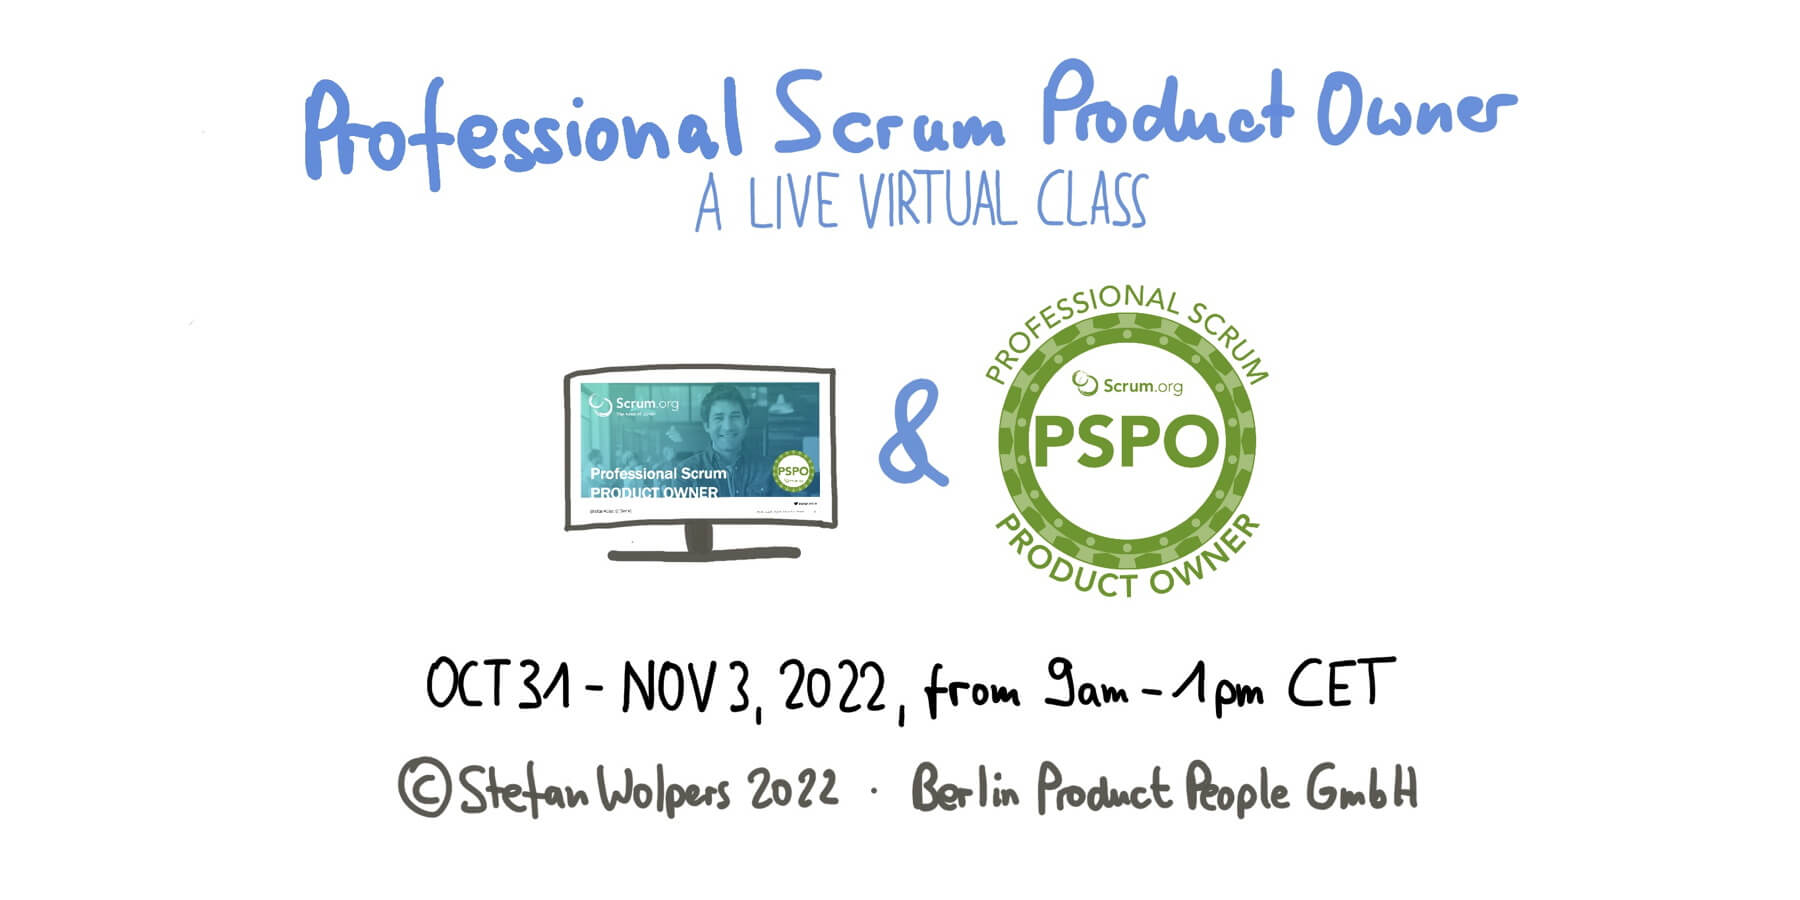 PSPO Product Owner Training mit PSPO I Certificate October 2022 — Berlin Product People GmbH BER-83